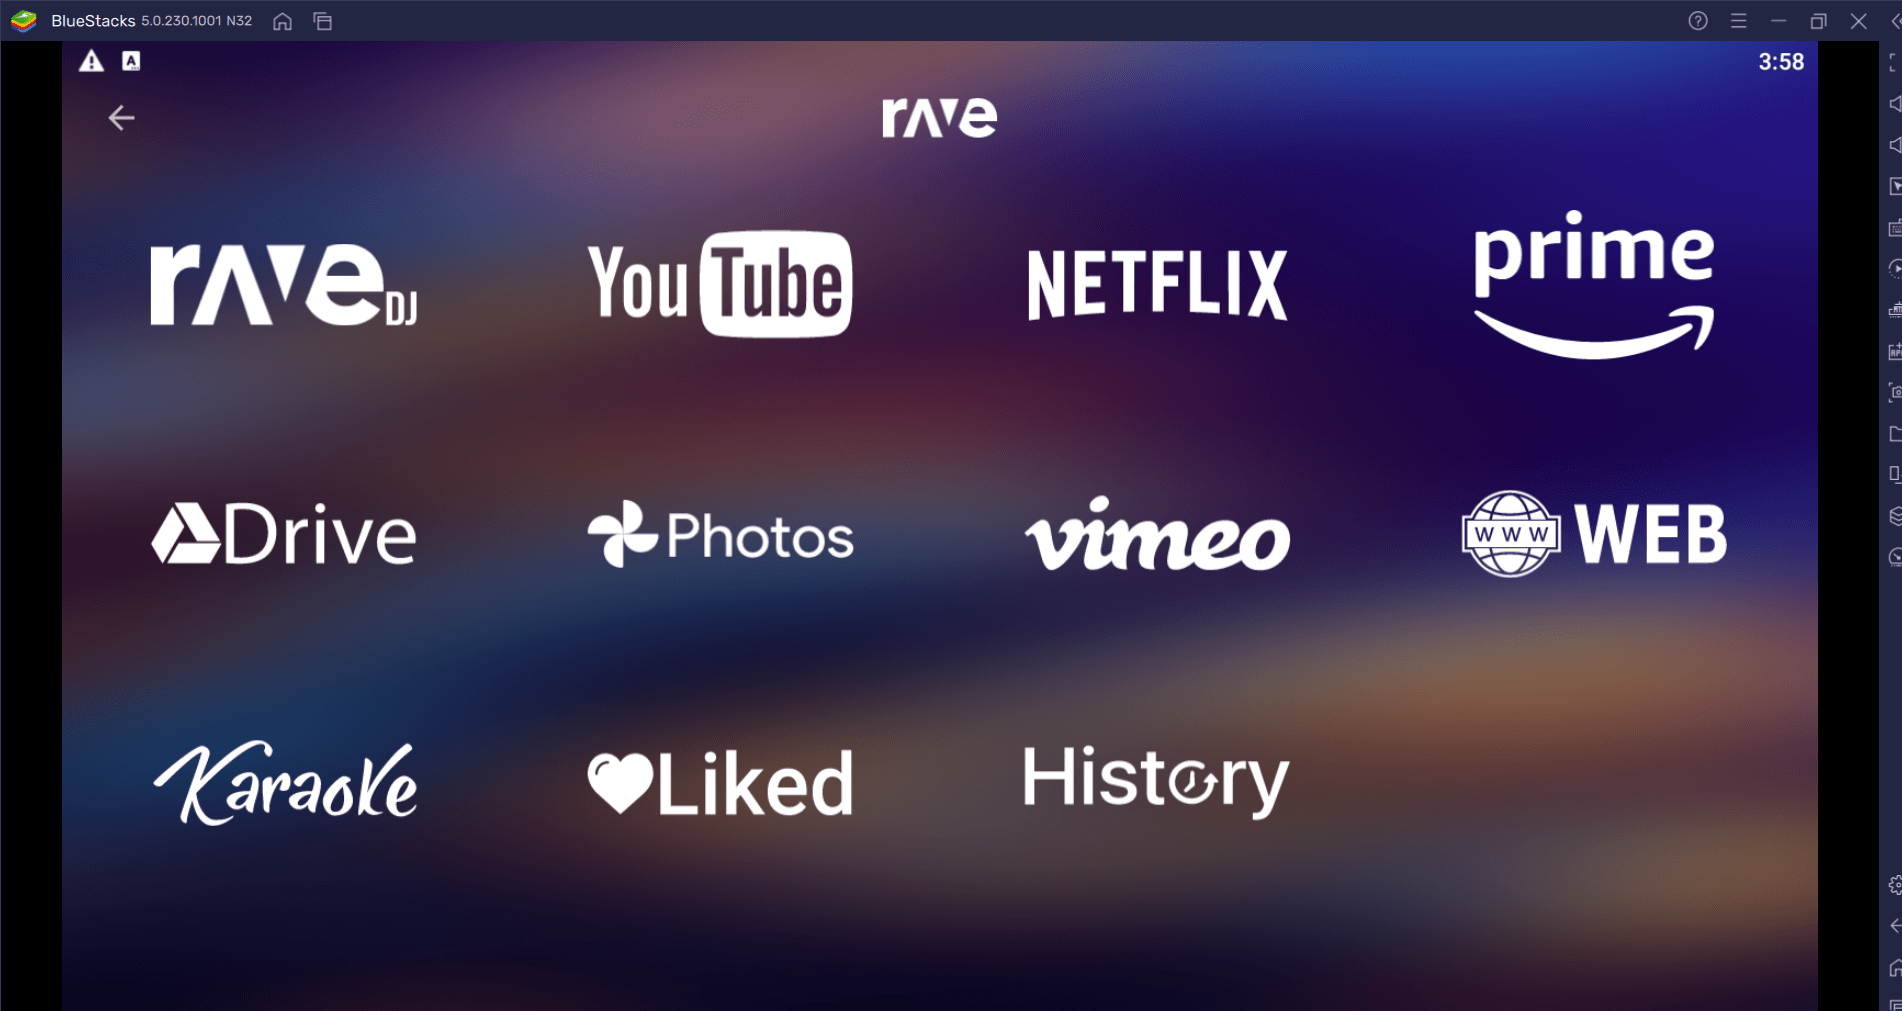 How To Download and Use Rave on Your PC